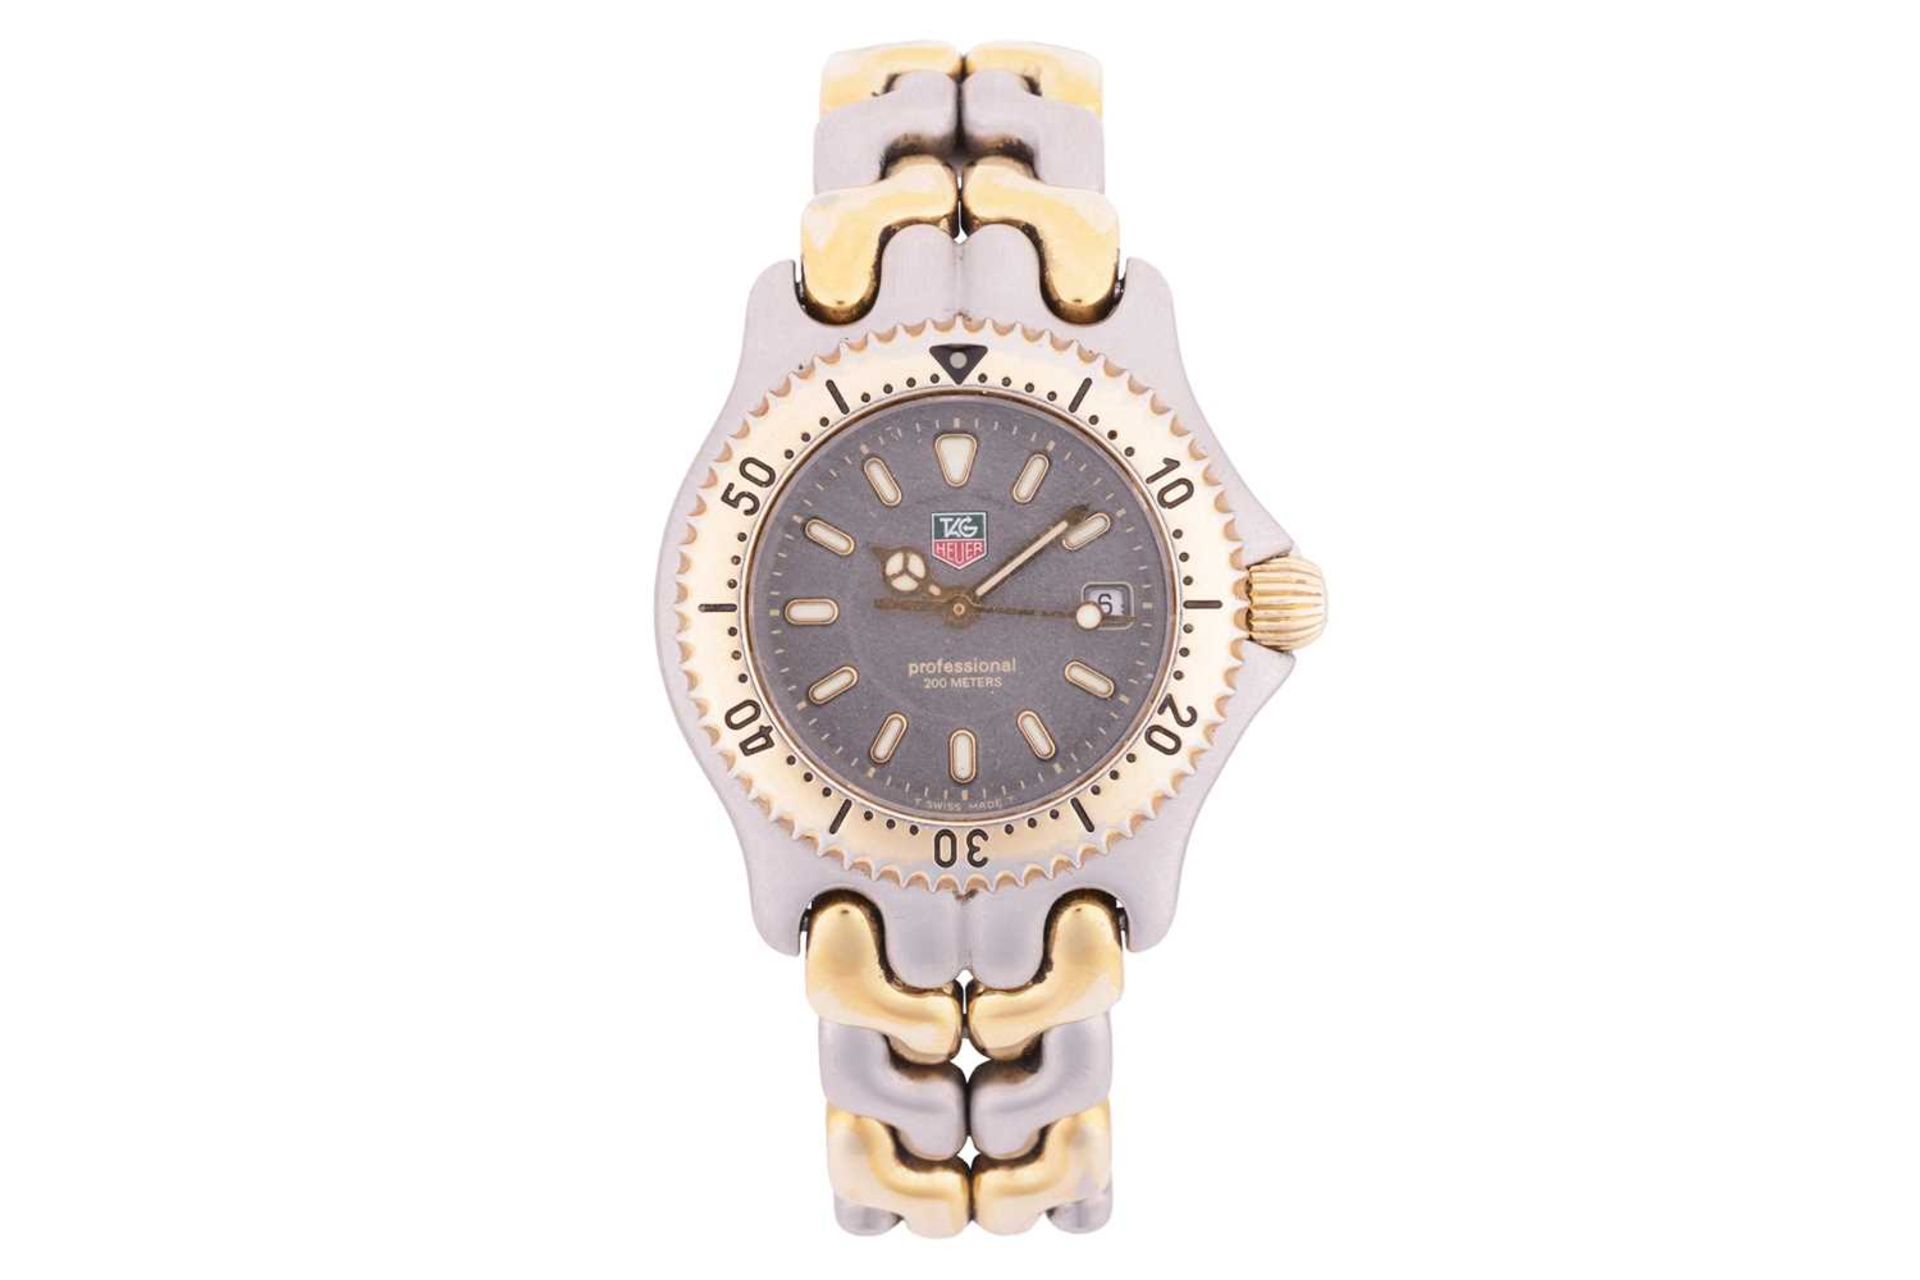 A Tag Heuer Professional 200 Meters Lady's Watch Model: WG 1320-2 Serial: EE2009 Case Material: